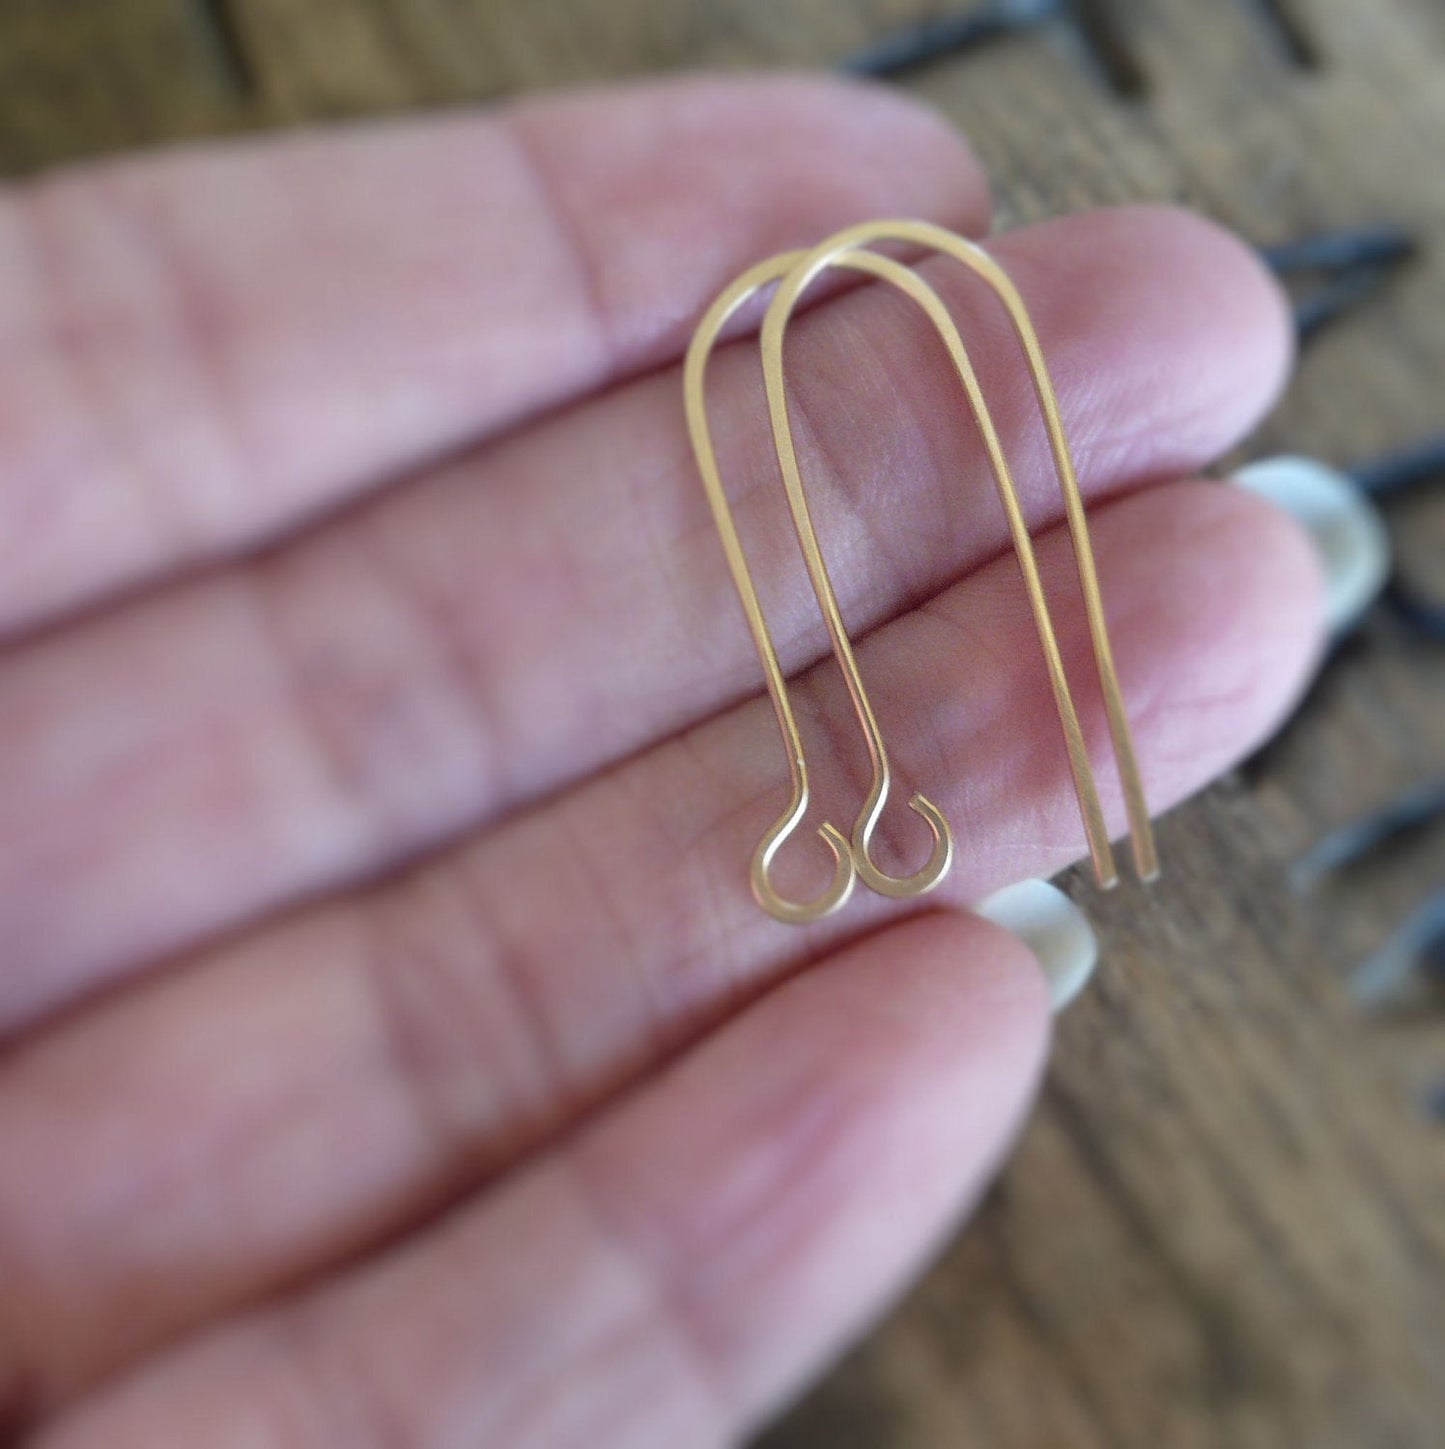 12 Pairs of my Minimalist 14kt Goldfill Earwires - Handmade. Handforged